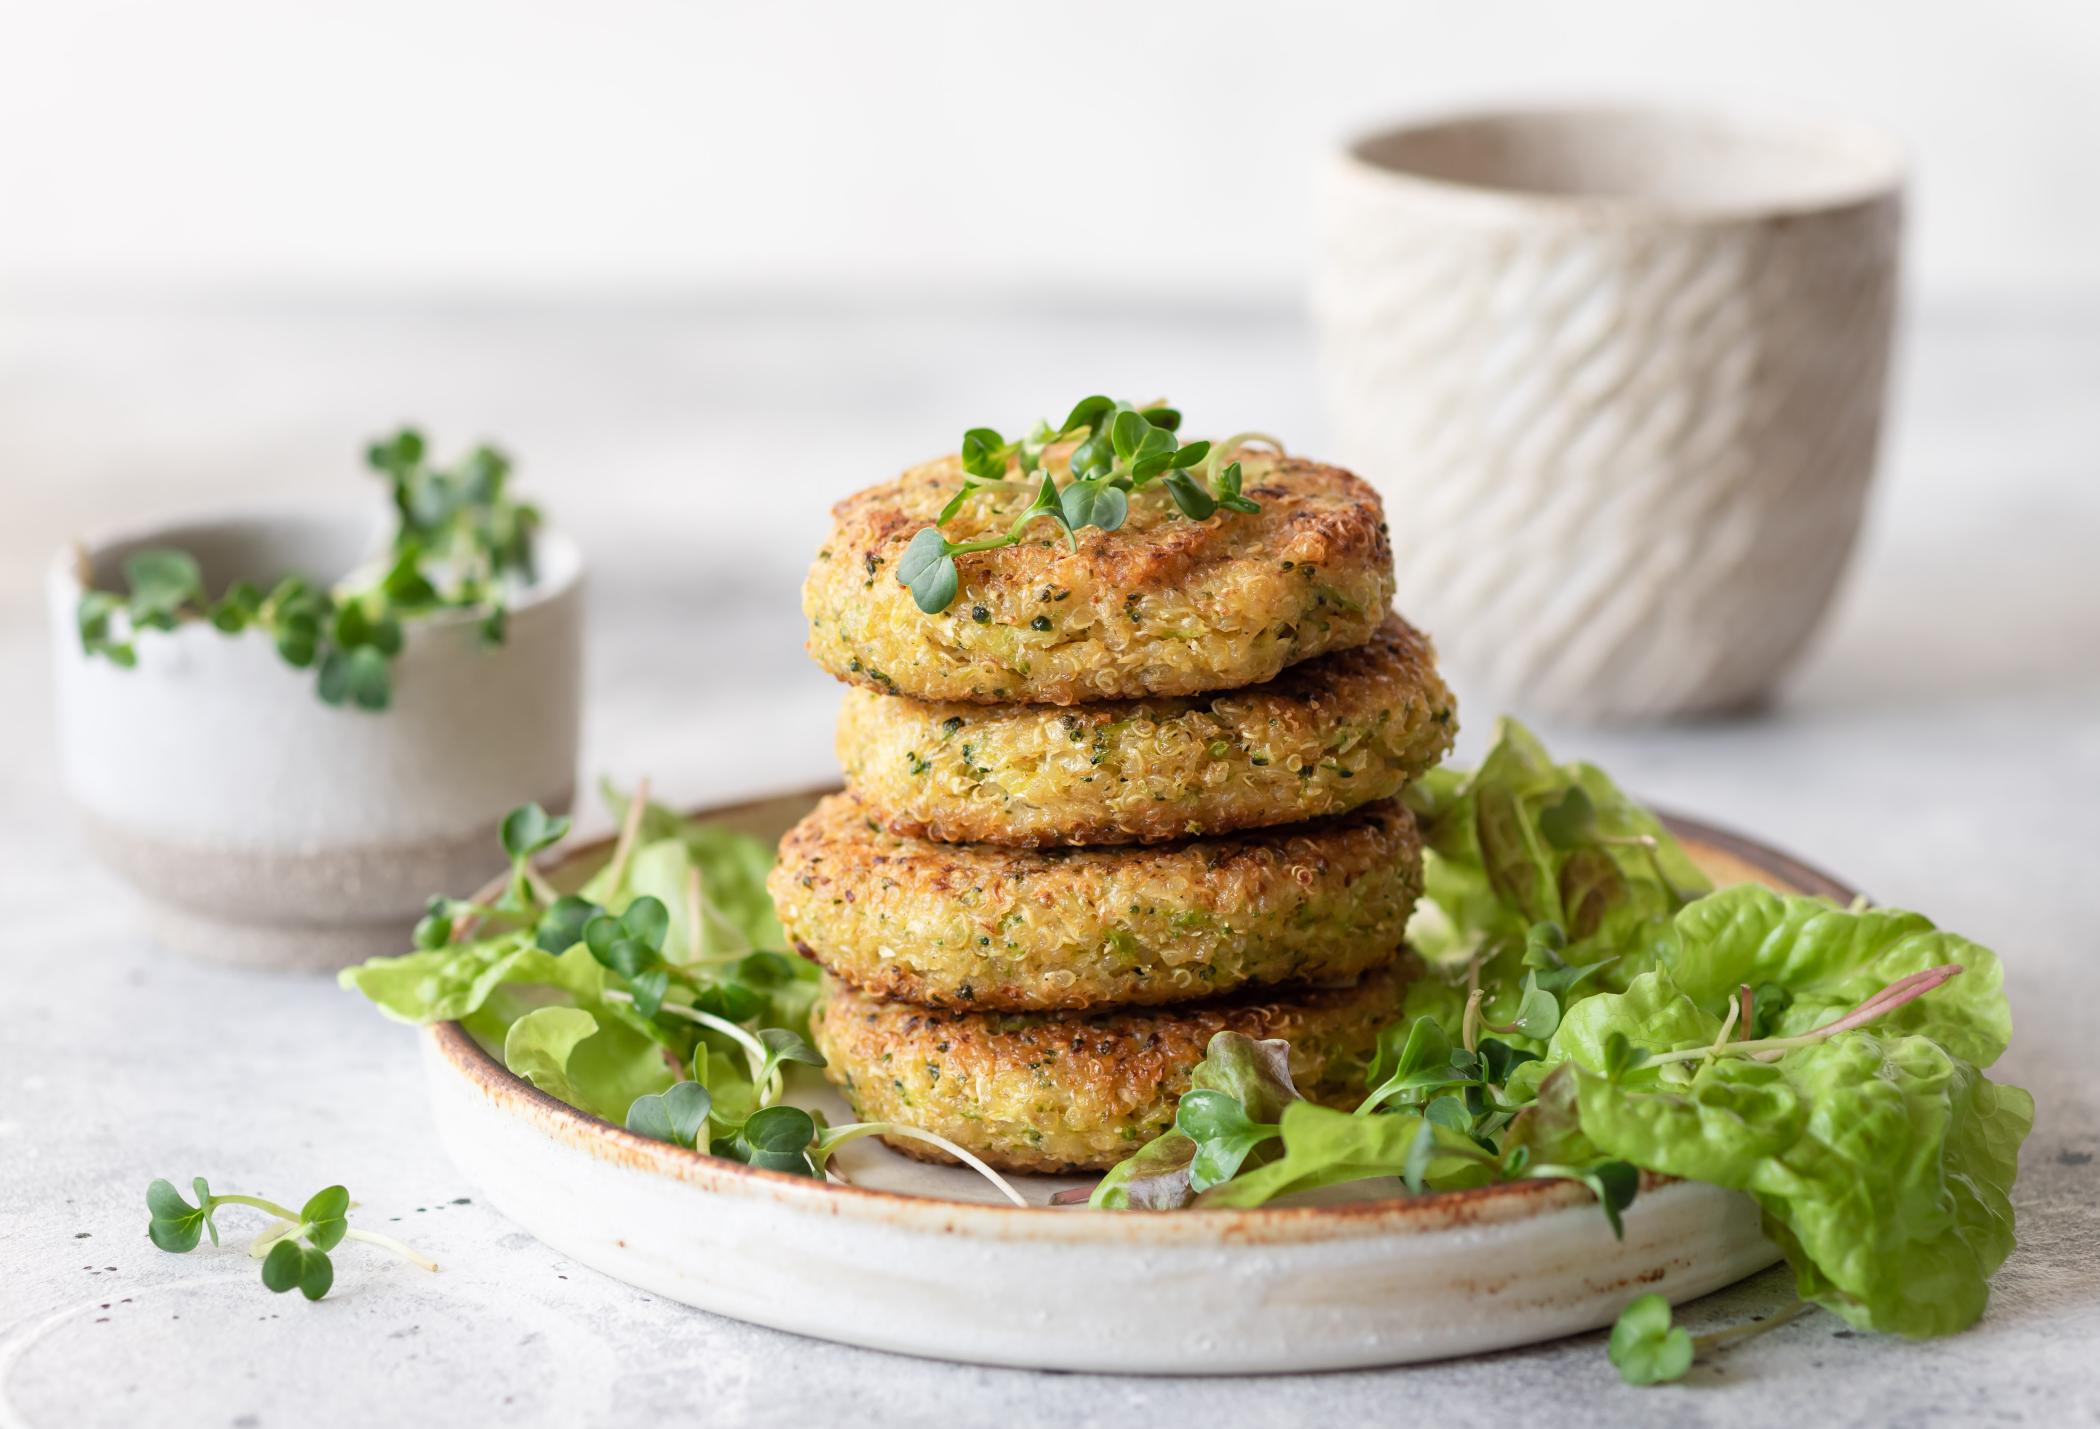 Green broccoli and quinoa burgers served with lettuce and microgreens.